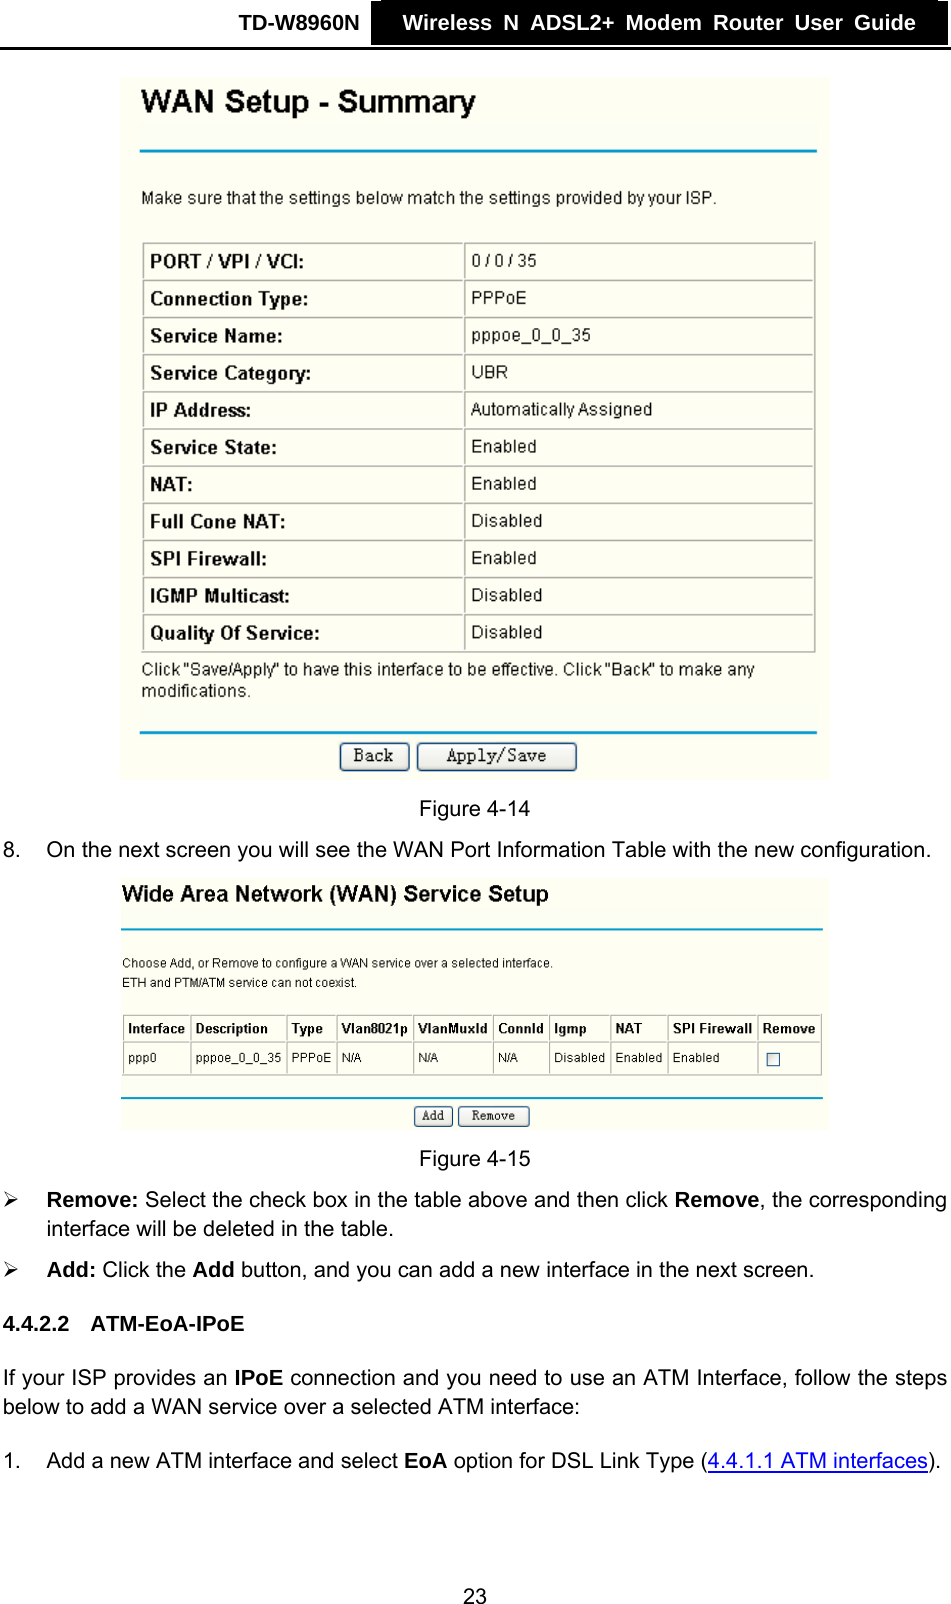 TD-W8960N    Wireless N ADSL2+ Modem Router User Guide     Figure 4-14 8.  On the next screen you will see the WAN Port Information Table with the new configuration.  Figure 4-15 ¾ Remove: Select the check box in the table above and then click Remove, the corresponding interface will be deleted in the table. ¾ Add: Click the Add button, and you can add a new interface in the next screen. 4.4.2.2  ATM-EoA-IPoE If your ISP provides an IPoE connection and you need to use an ATM Interface, follow the steps below to add a WAN service over a selected ATM interface: 1.  Add a new ATM interface and select EoA option for DSL Link Type (4.4.1.1 ATM interfaces). 23 